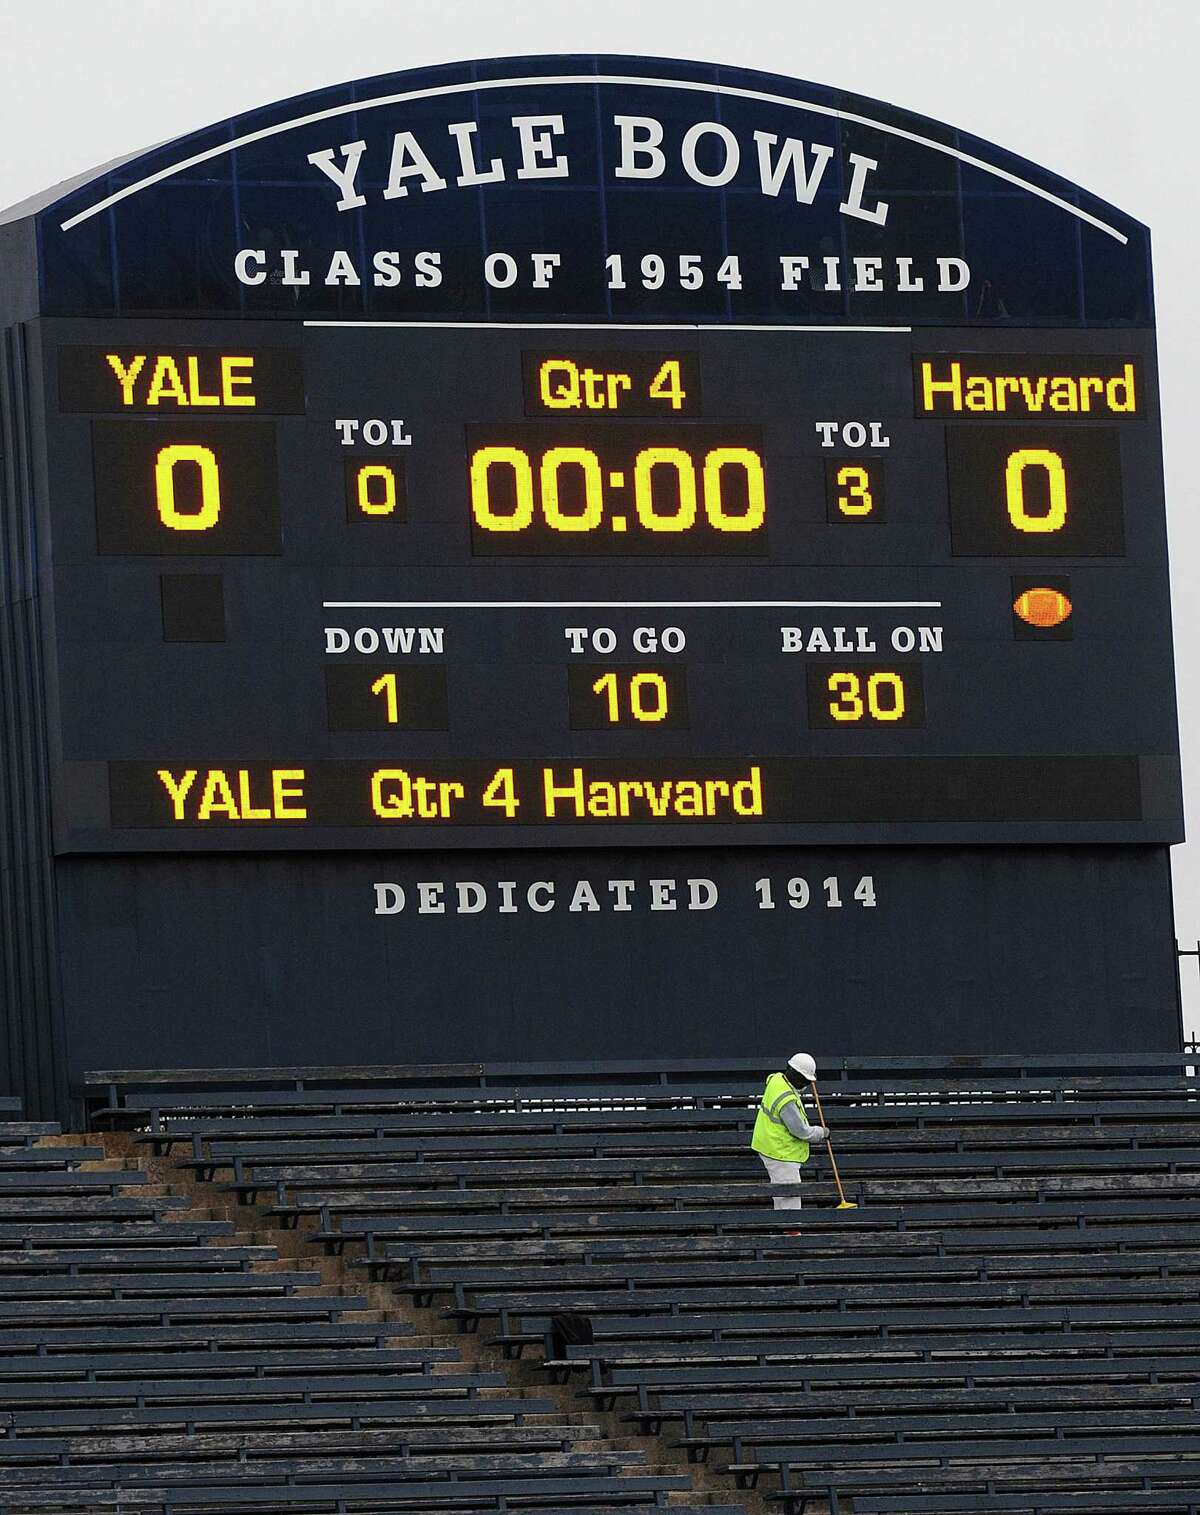 A worker cleans under the scoreboard at Yale Bowl as contractors and Yale employees ready the stadium for the big match-up against Harvard in 2011.